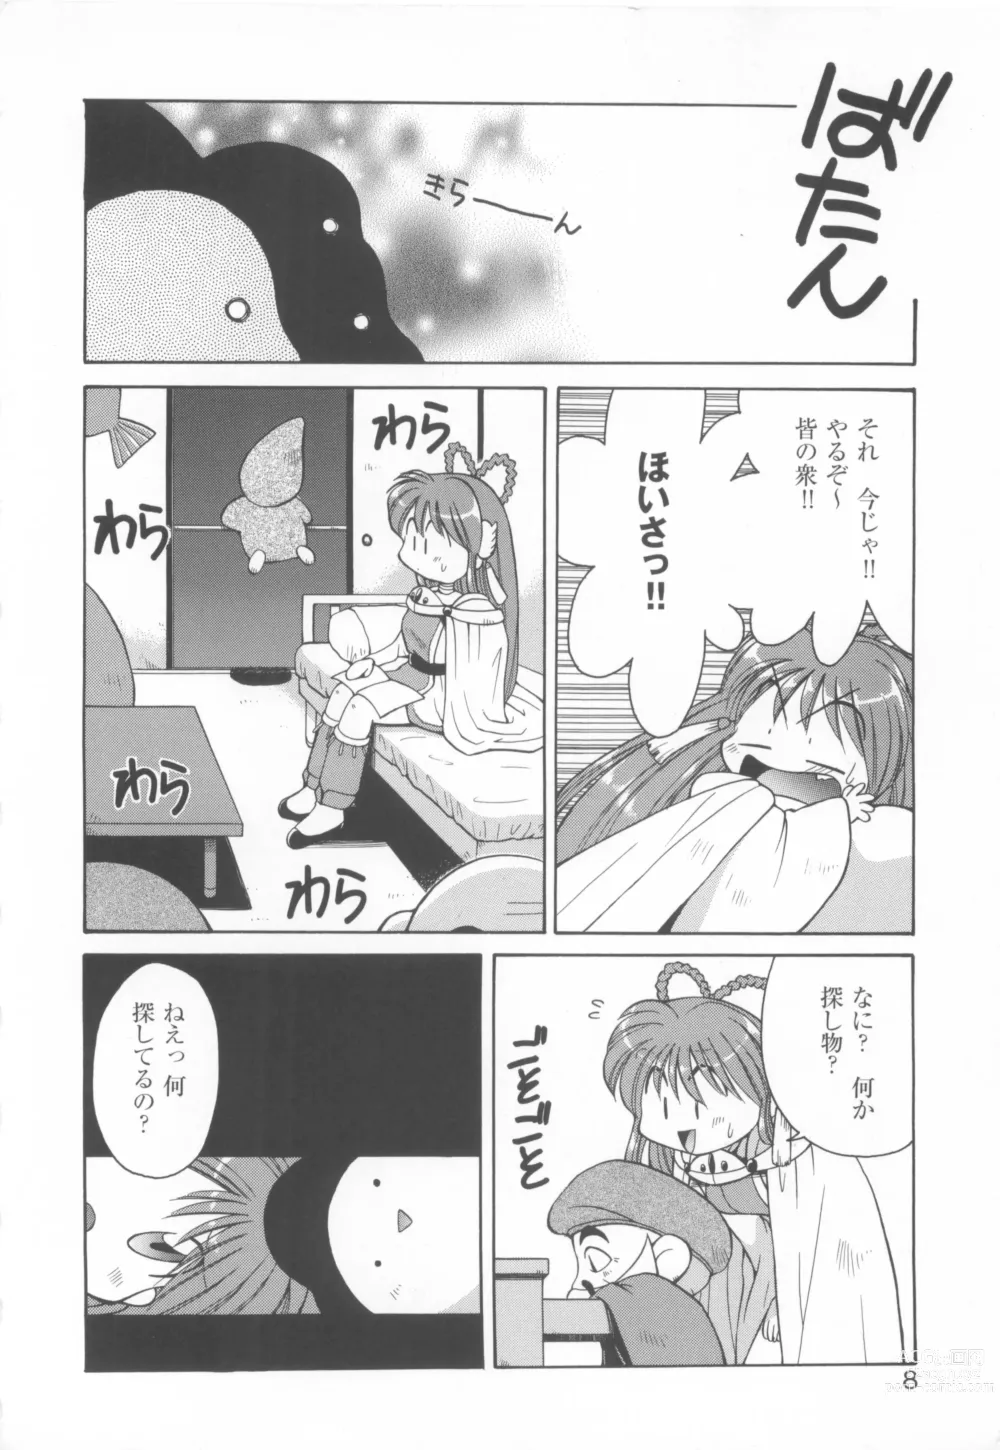 Page 10 of manga CAN CAN BUNNY ANTHOLOGY COMIC 2